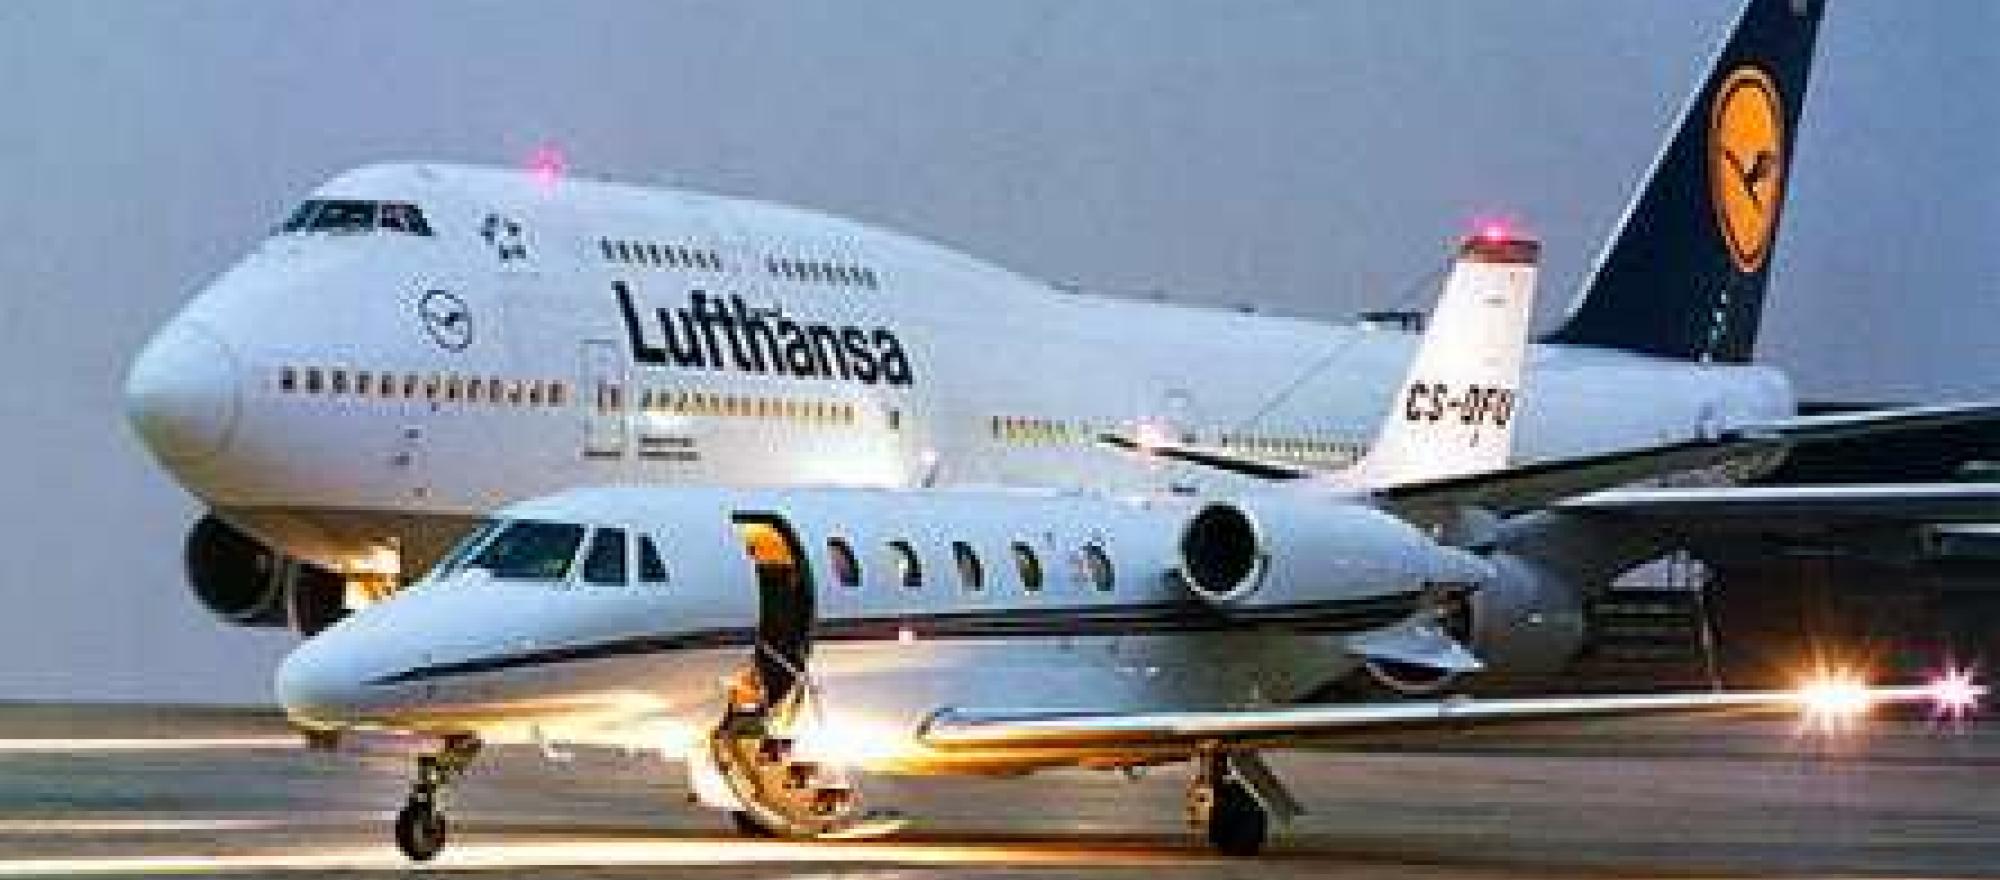 Lufthansa Private Jet Coming To North America